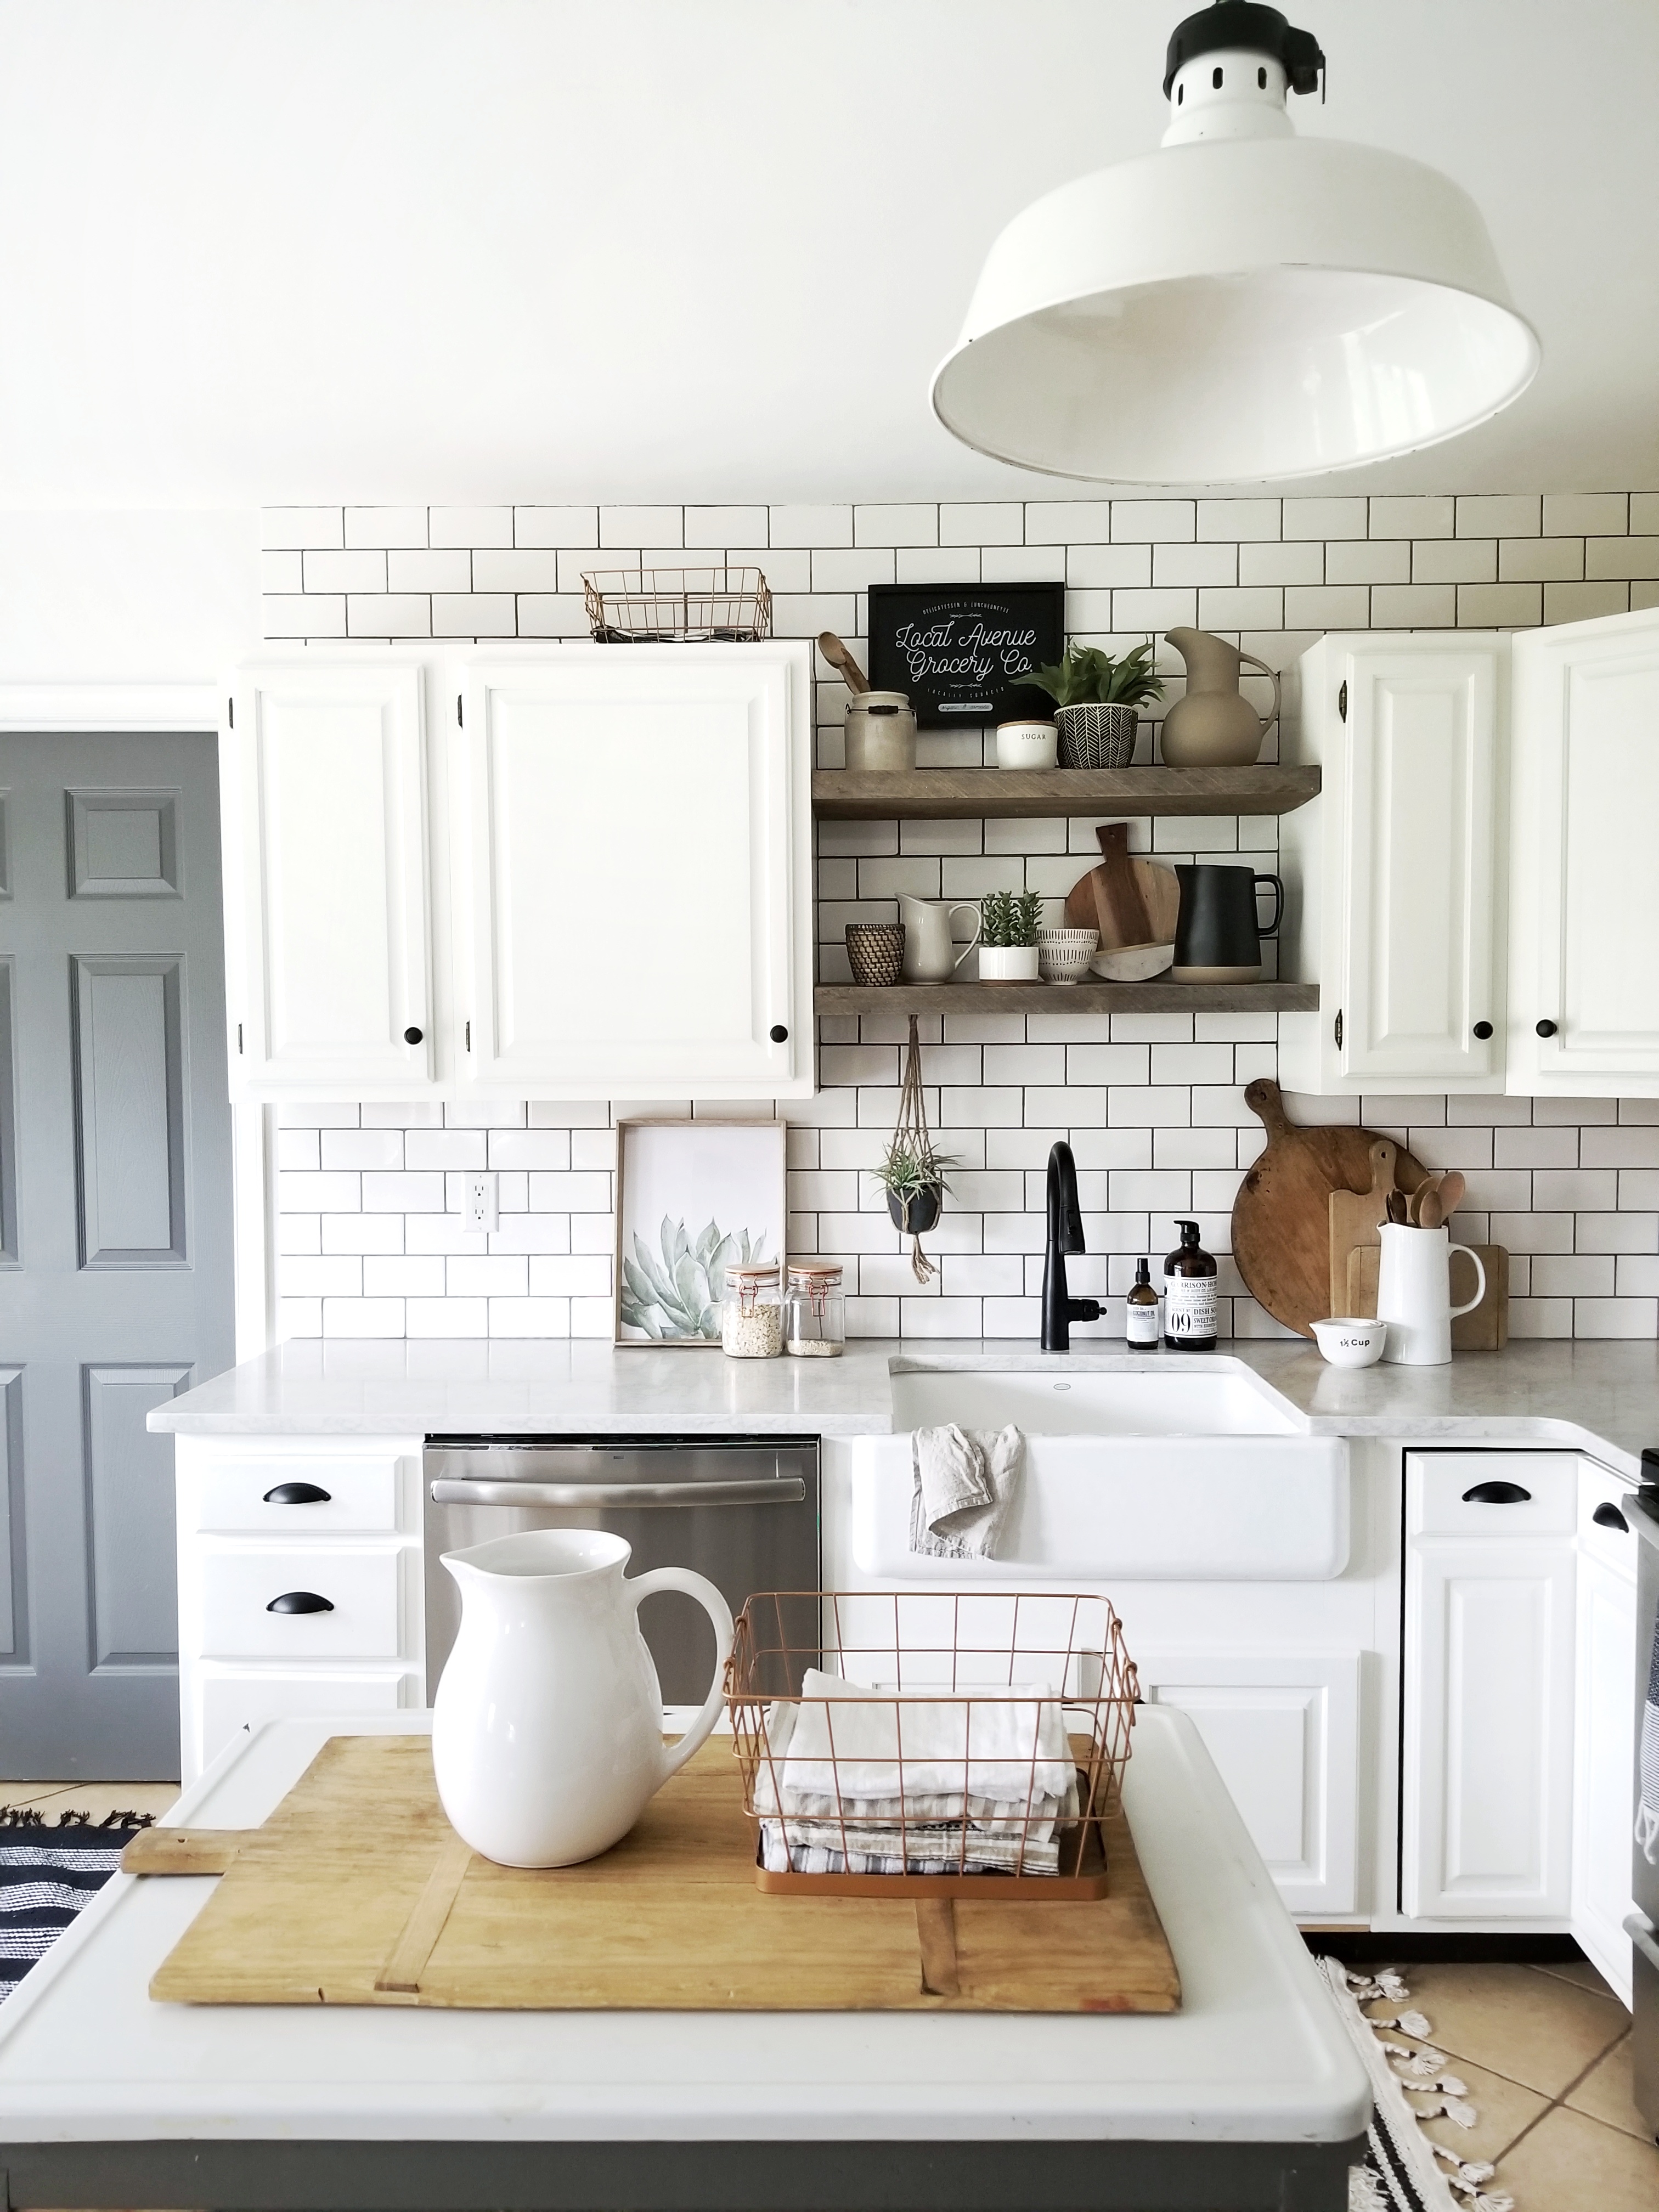 Before & After Our Kitchen Story   Part 18   Showit Blog